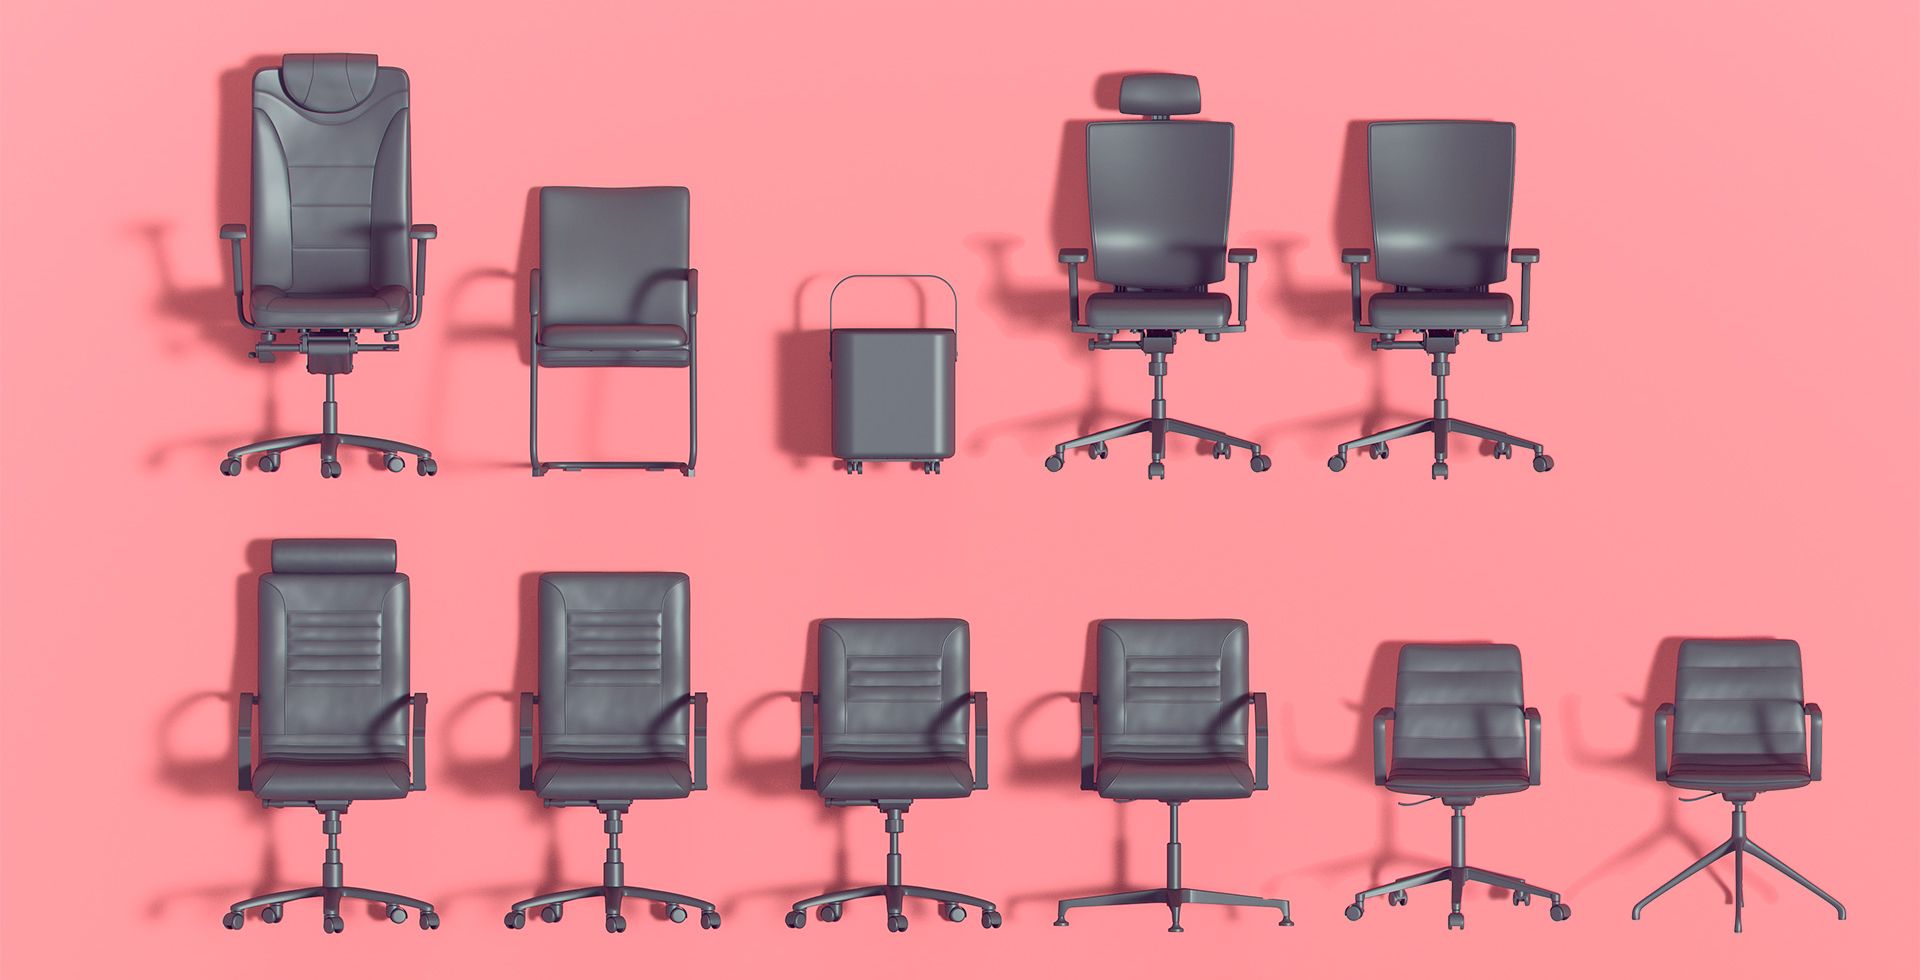 3D render of a Dromeas office chair